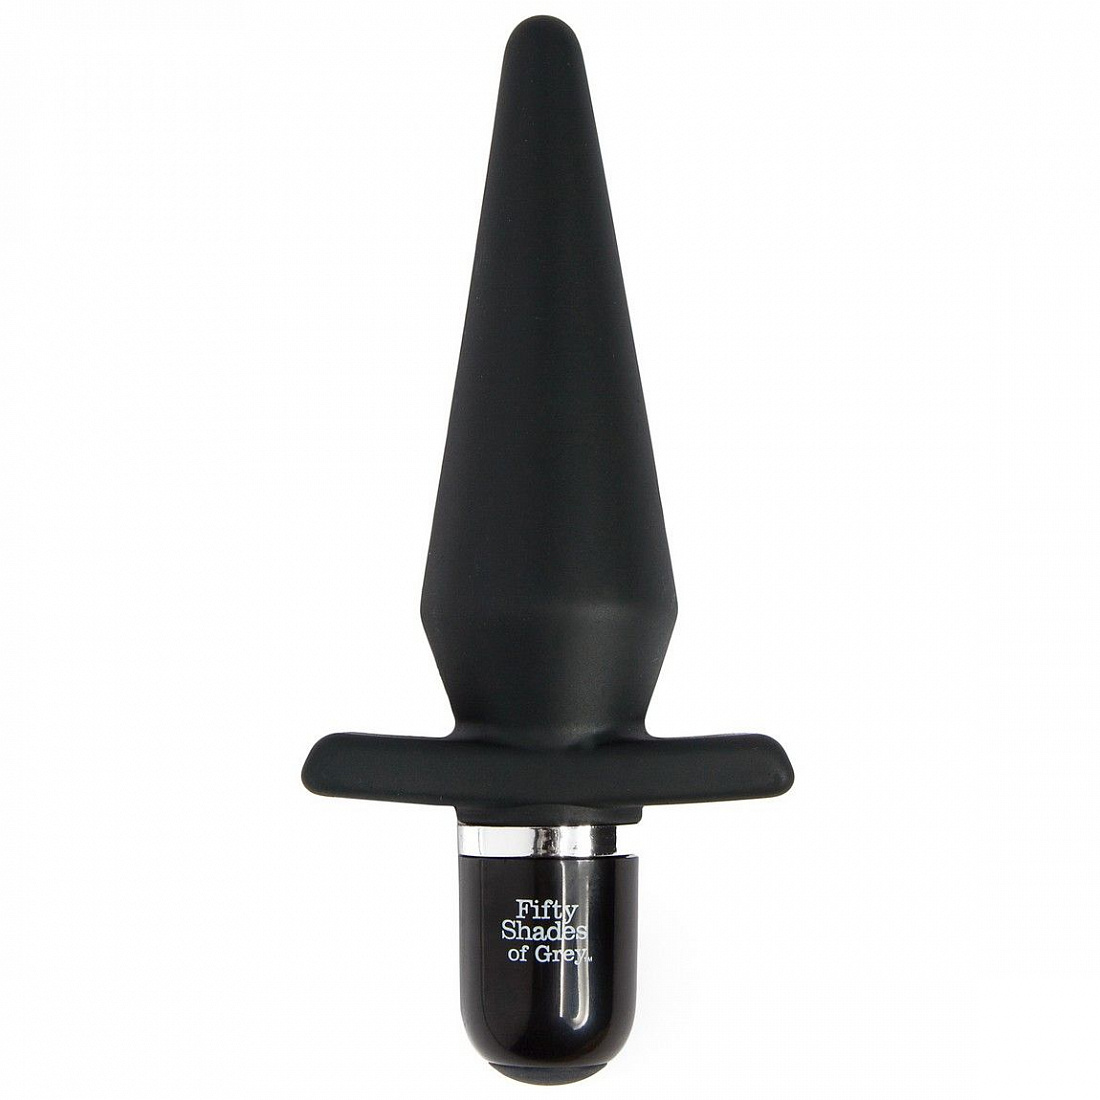      Delicious Fullness Vibrating Butt Plug - 14 . Fifty Shades of Grey FS-48291 -  3 550 .